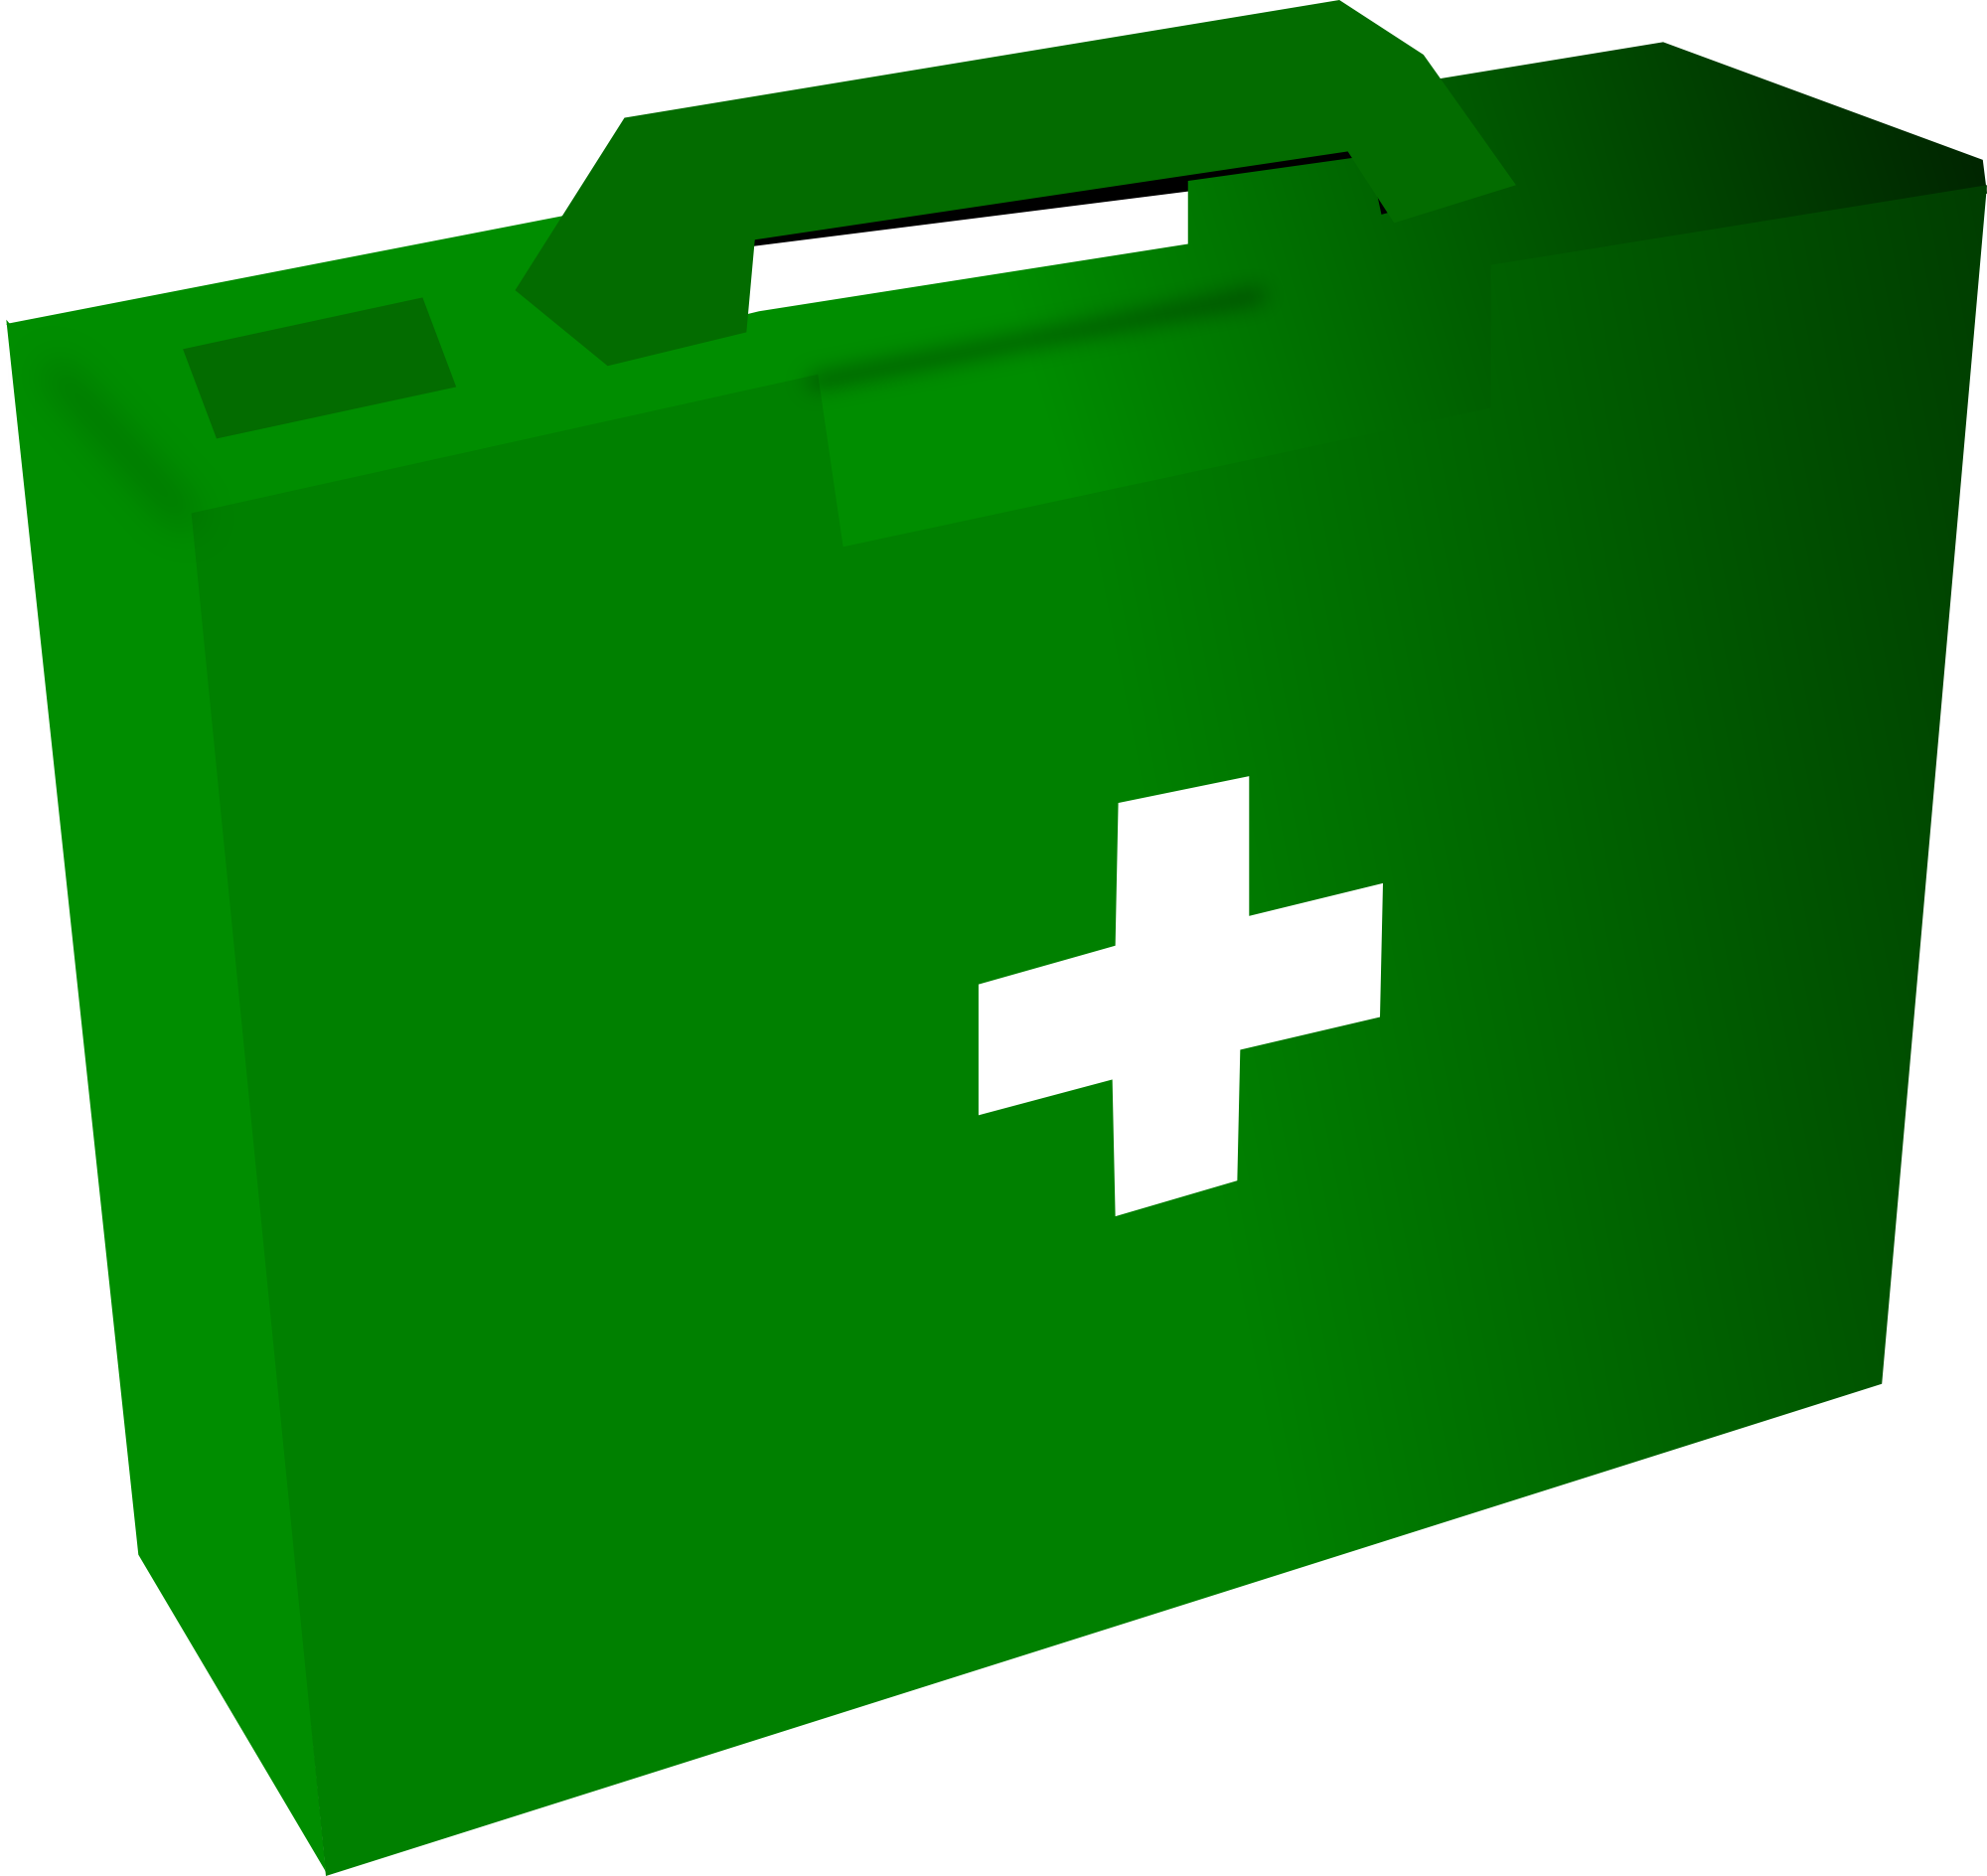 First aid clipart free image at clker vector clip art image